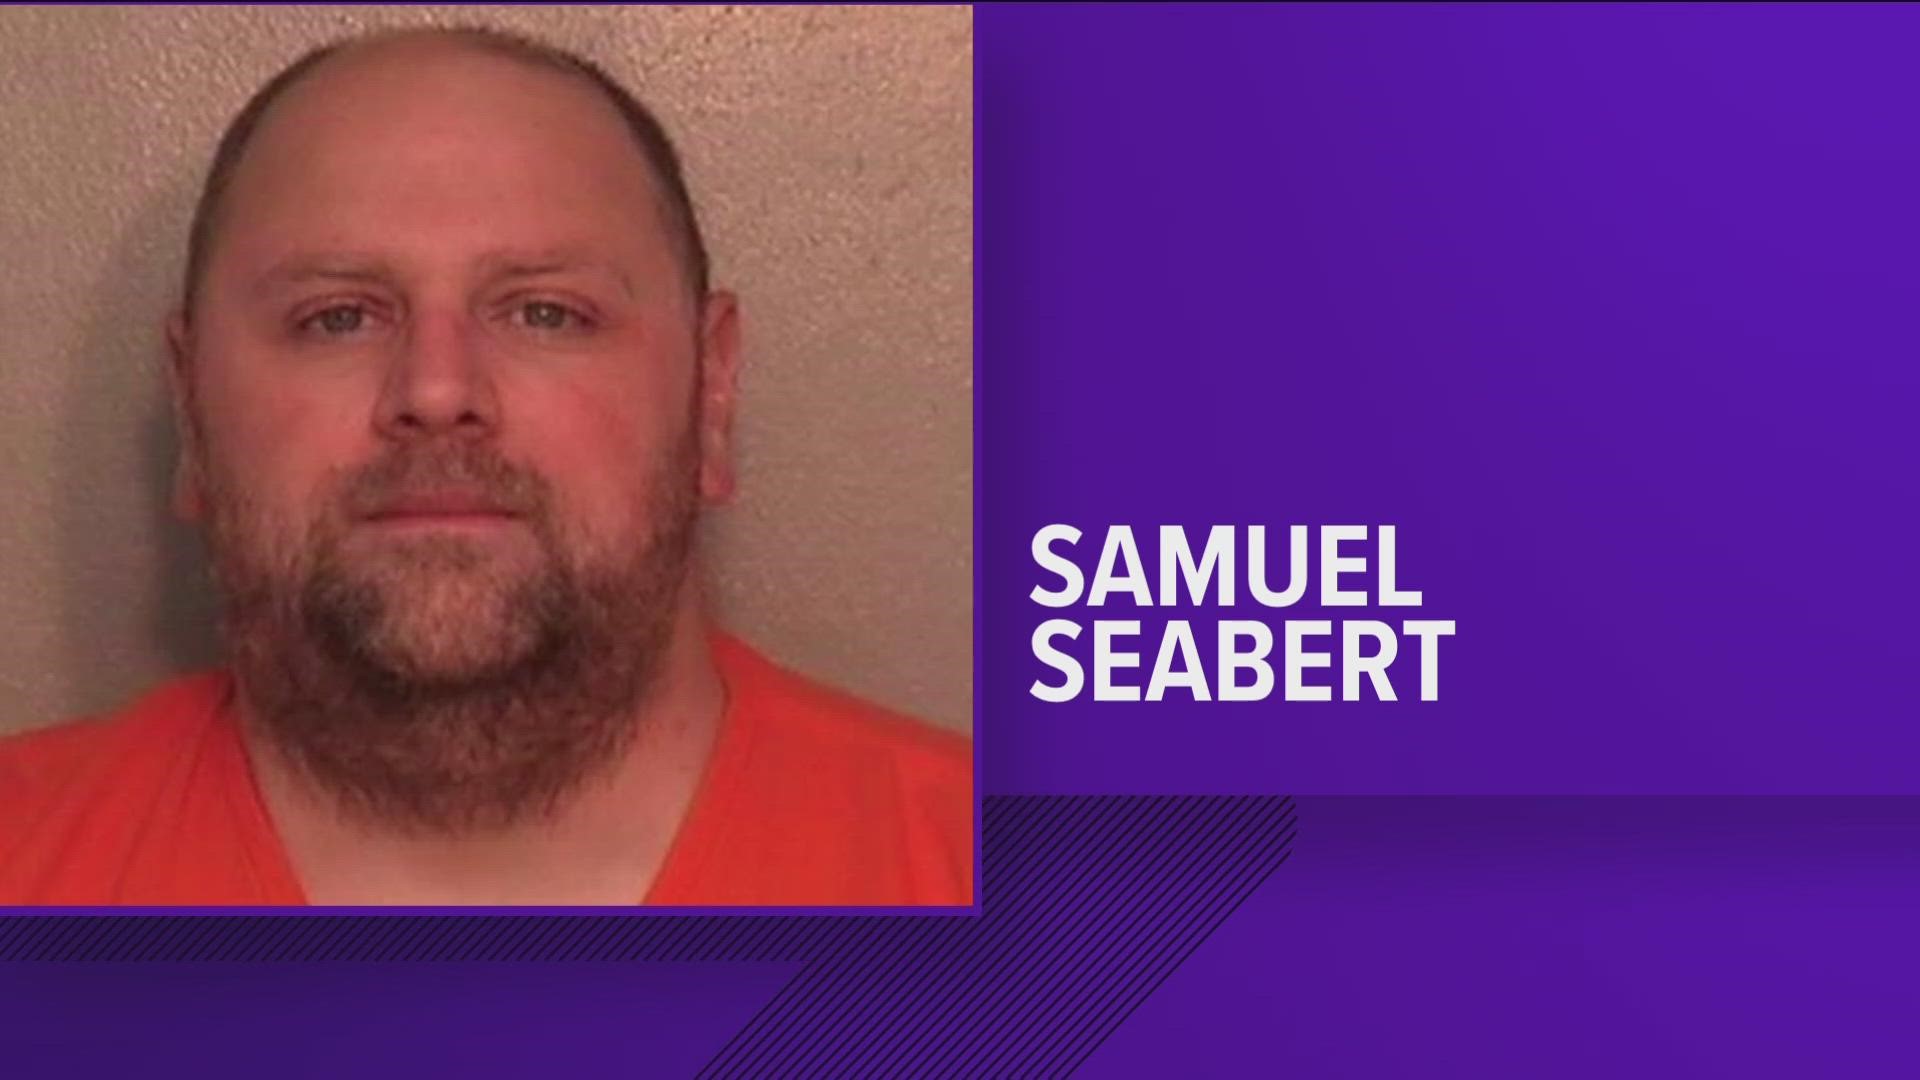 Carey police have charged 43-year-old Samuel Seabert with homicide in connection with the shooting death of Nathan Stroub.